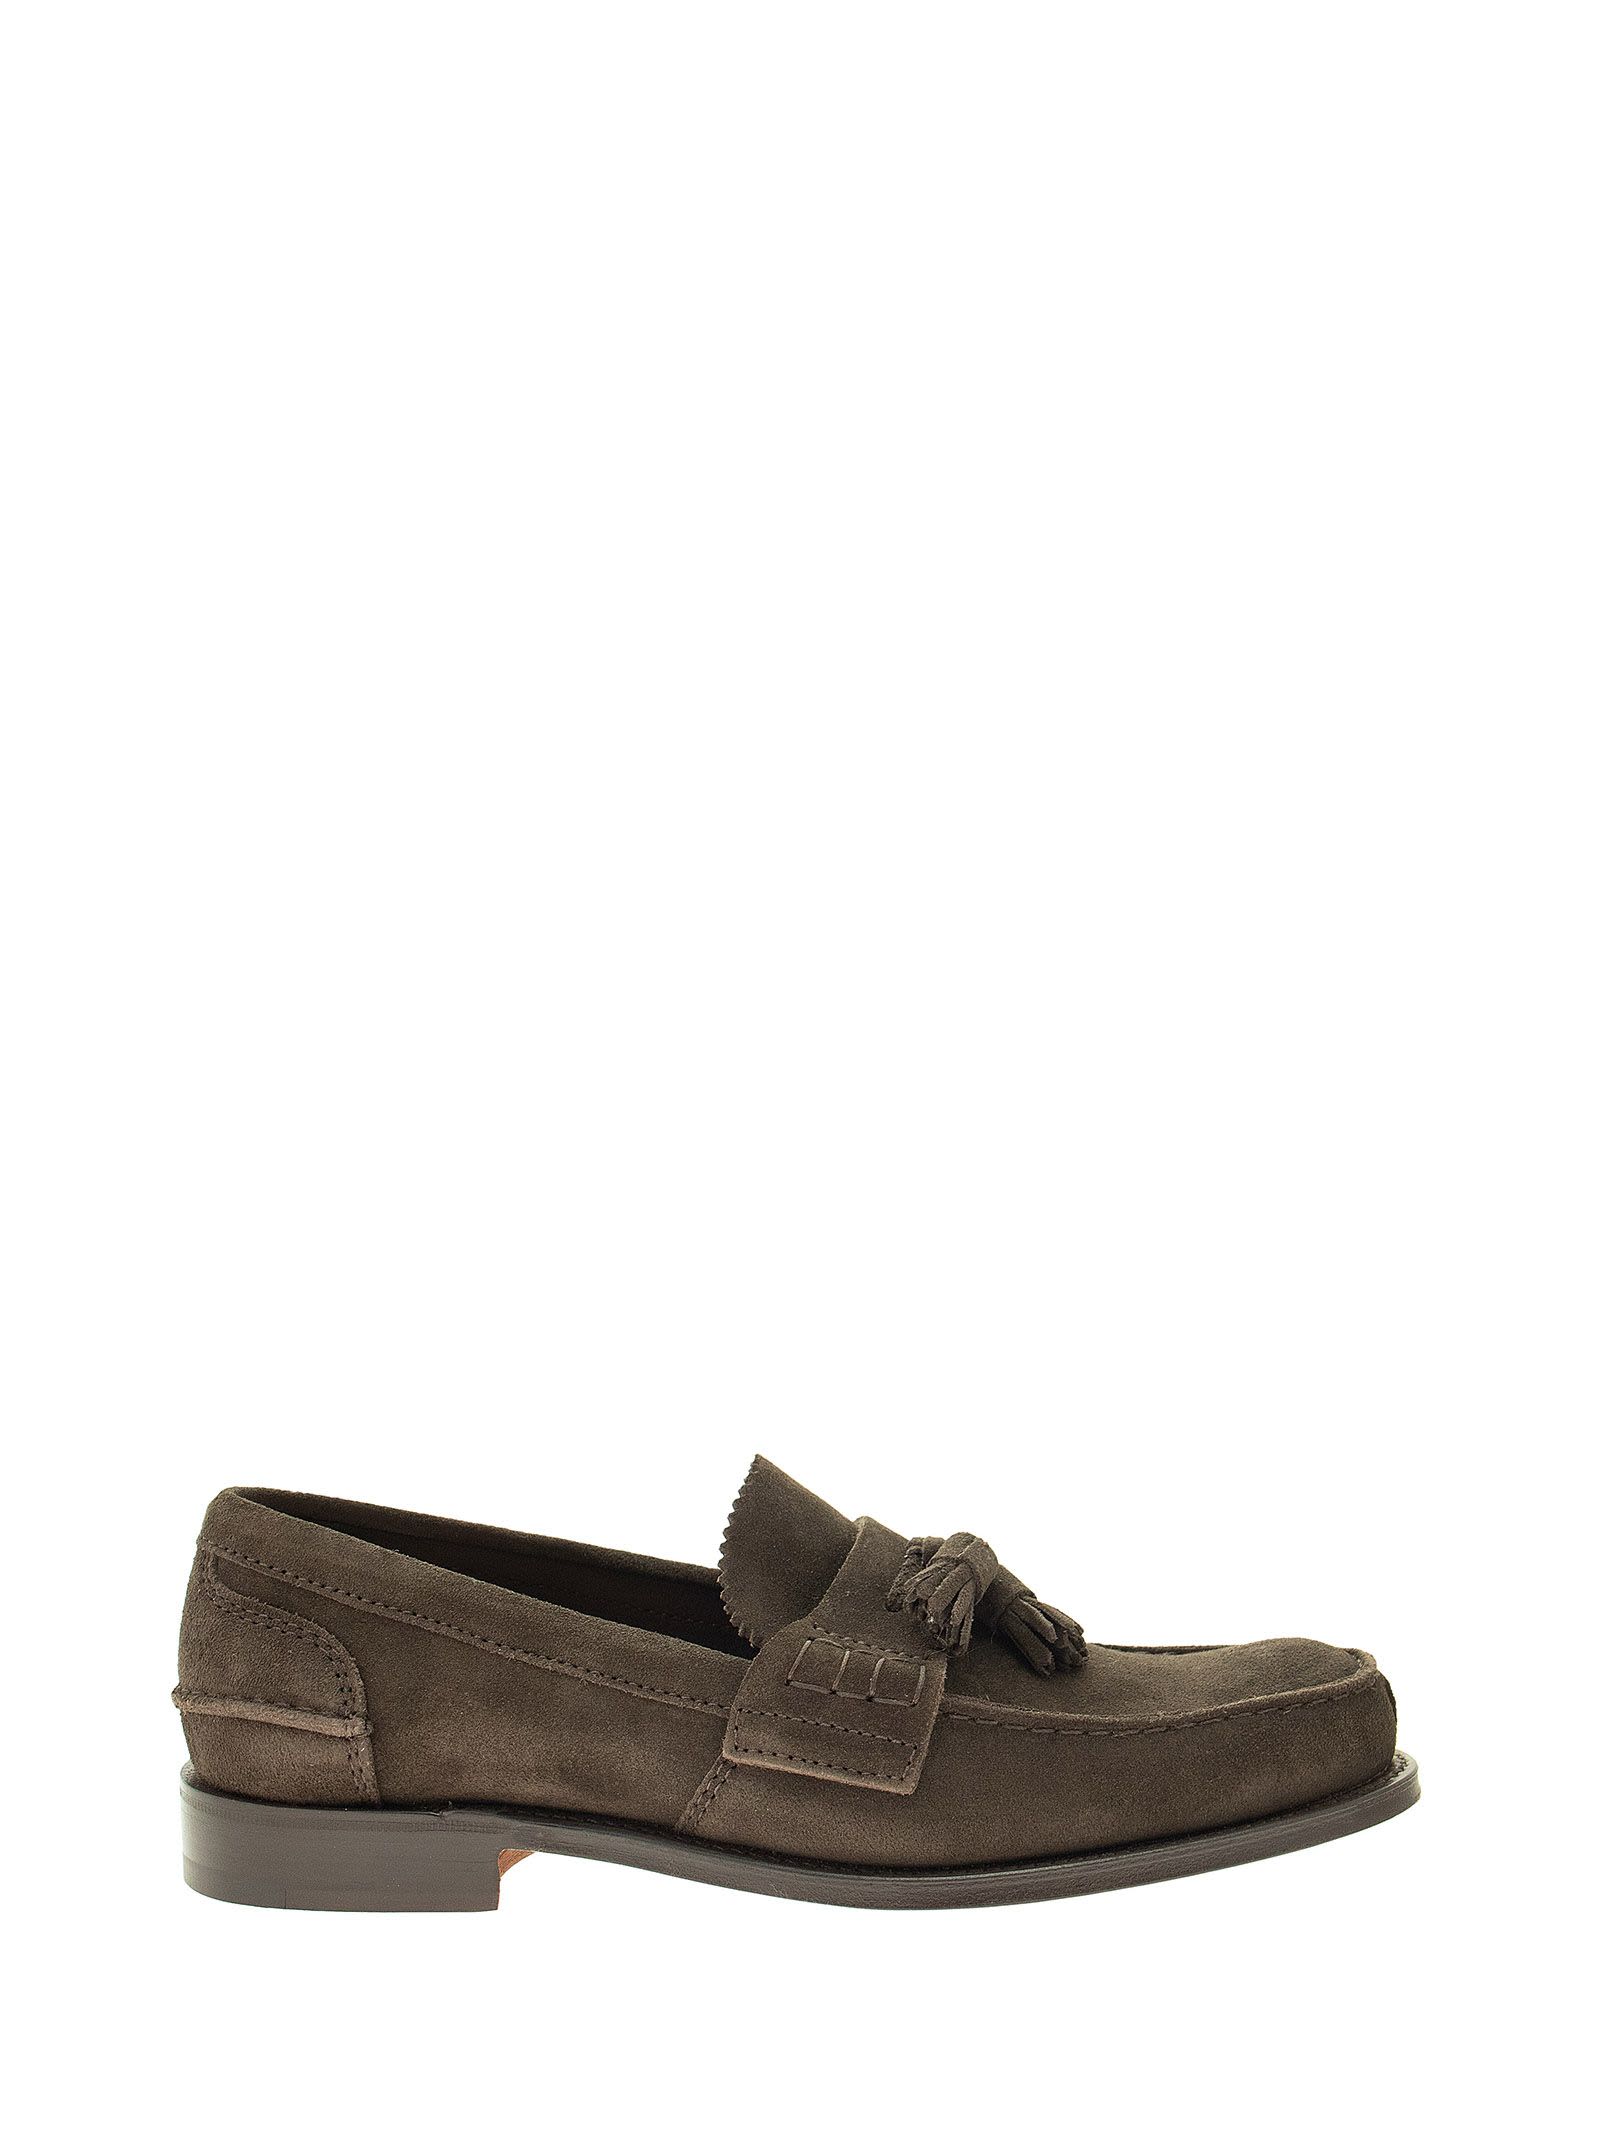 Churchs Tiverton - Suede Loafers With Tassels